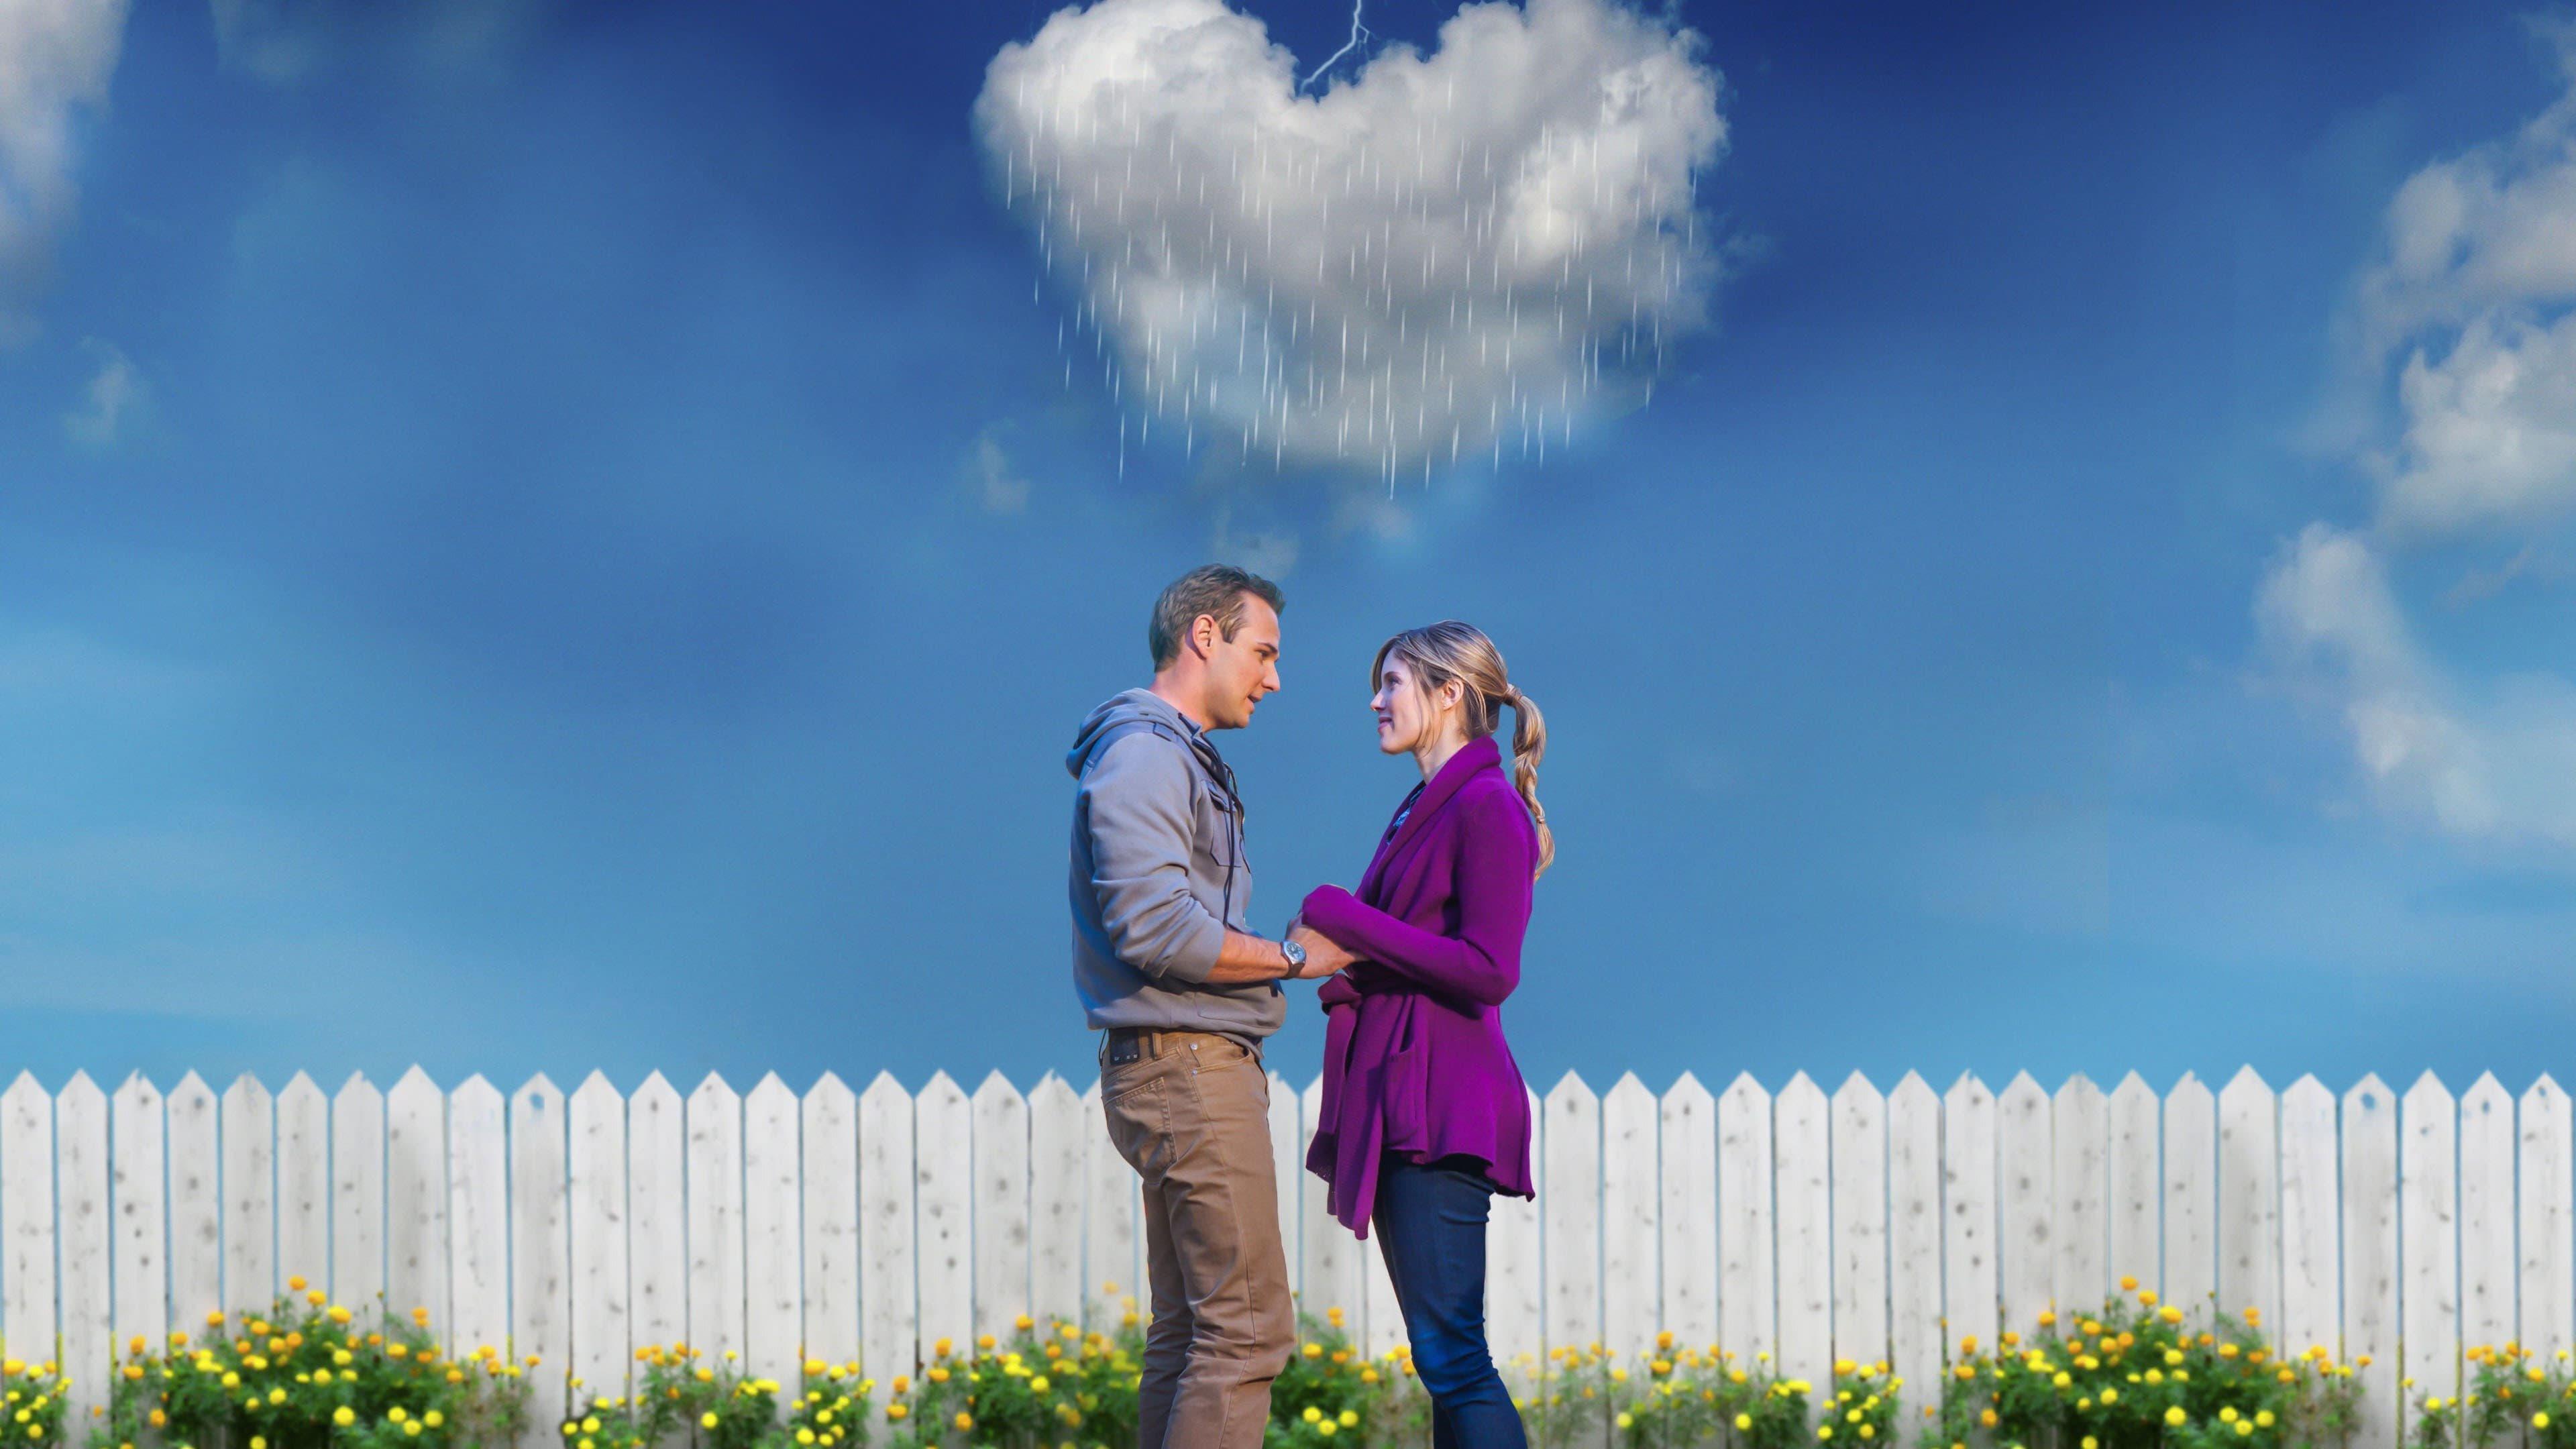 How Not to Propose backdrop